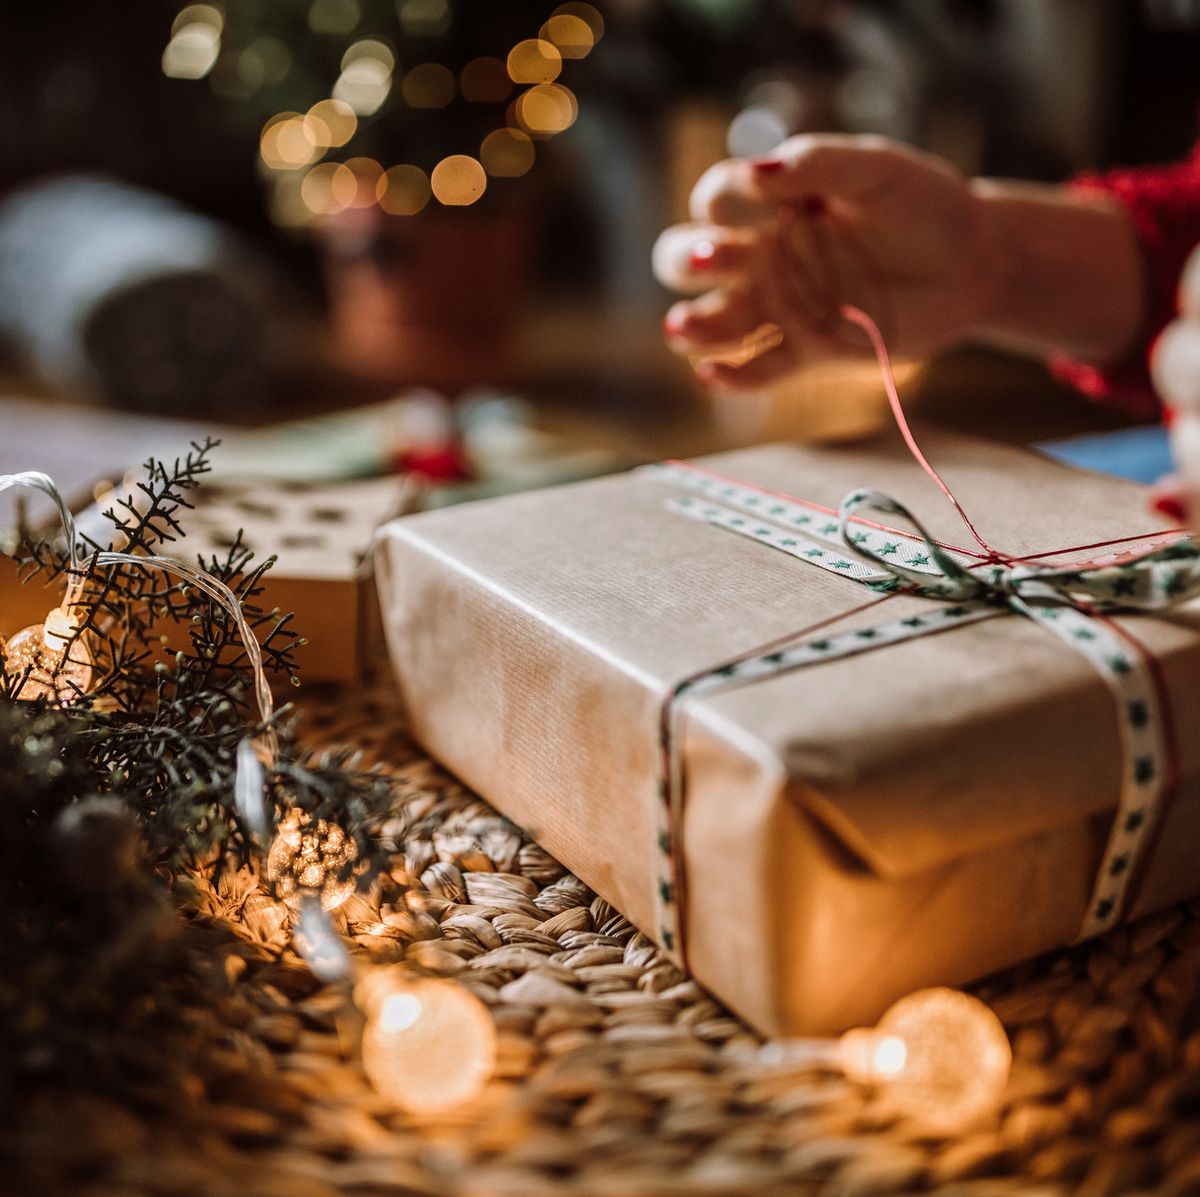 How we turned our family's holiday gift exchange into a chance to